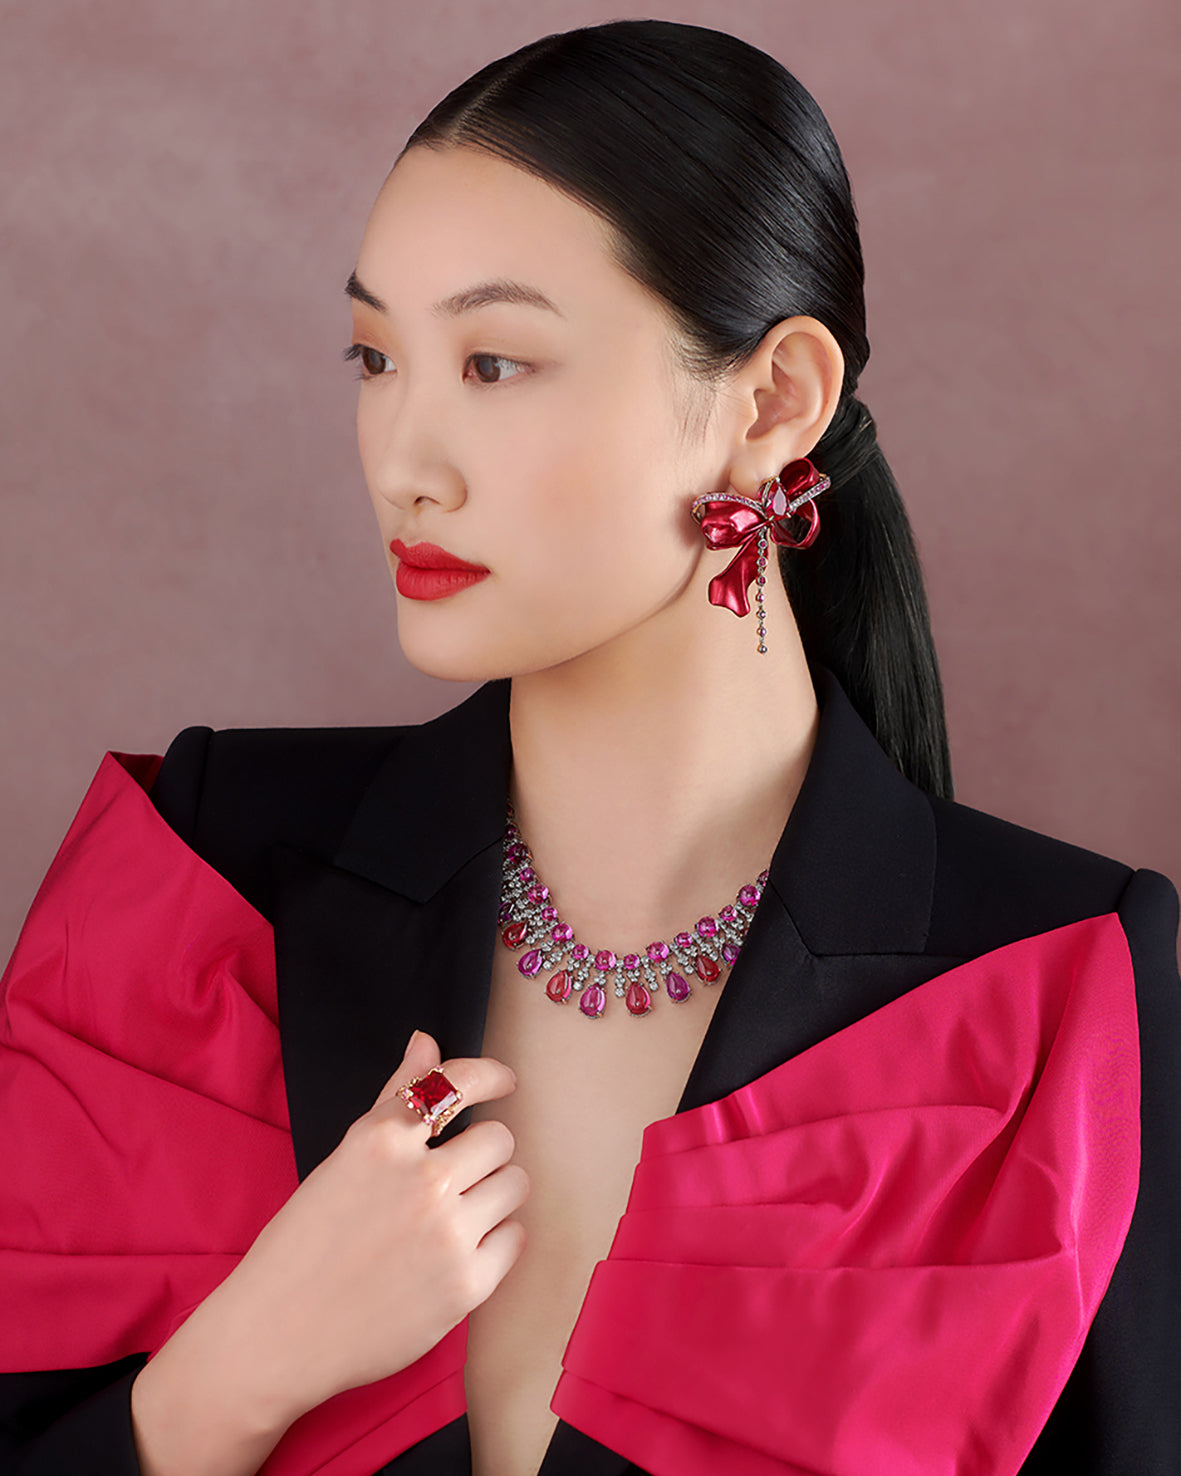 Anabela Chan Joaillerie_Ruby Cupid's Bow Earrings, Pomegranate Tutti Frutti Necklace, Ruby Cinderella Ring_Model Campaign Shot